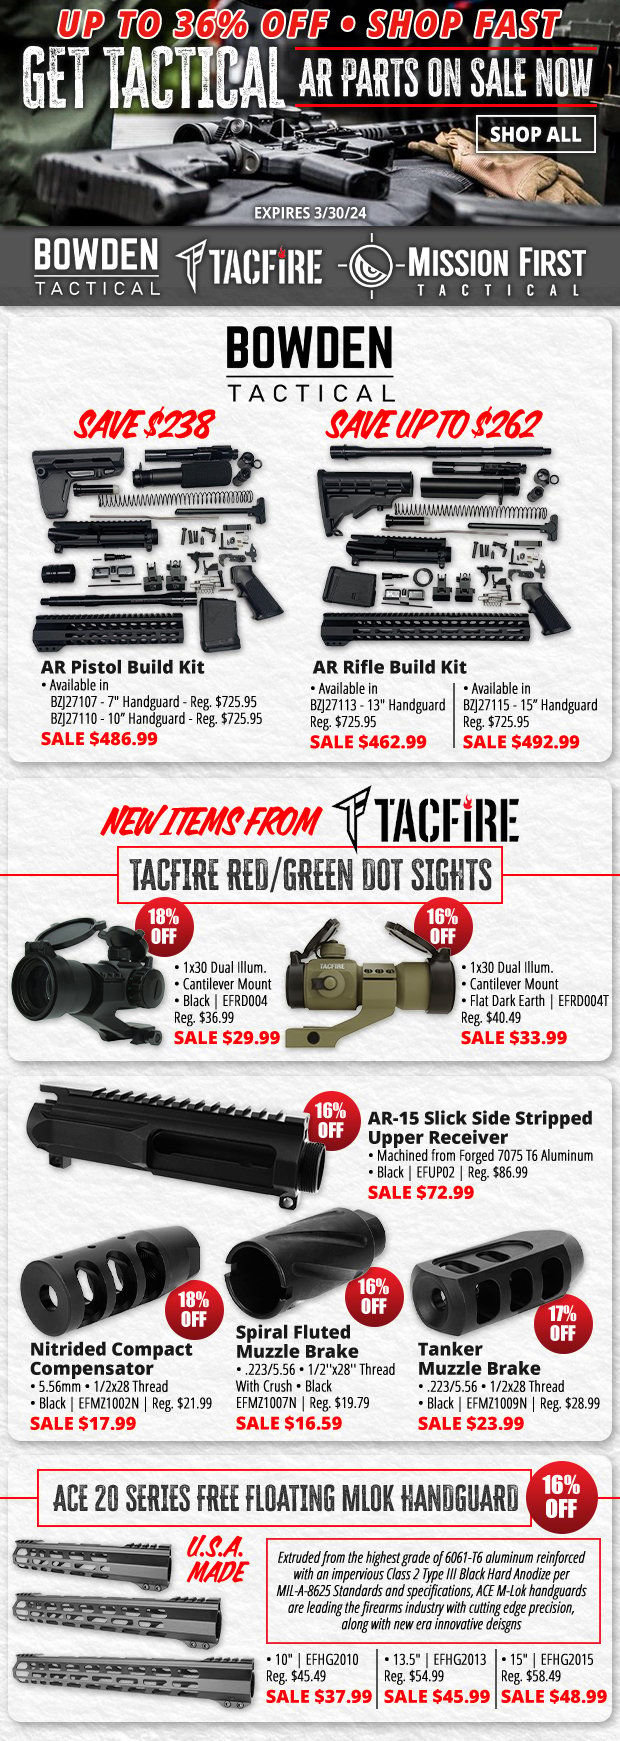 Get Tactical with Up to 36% Off